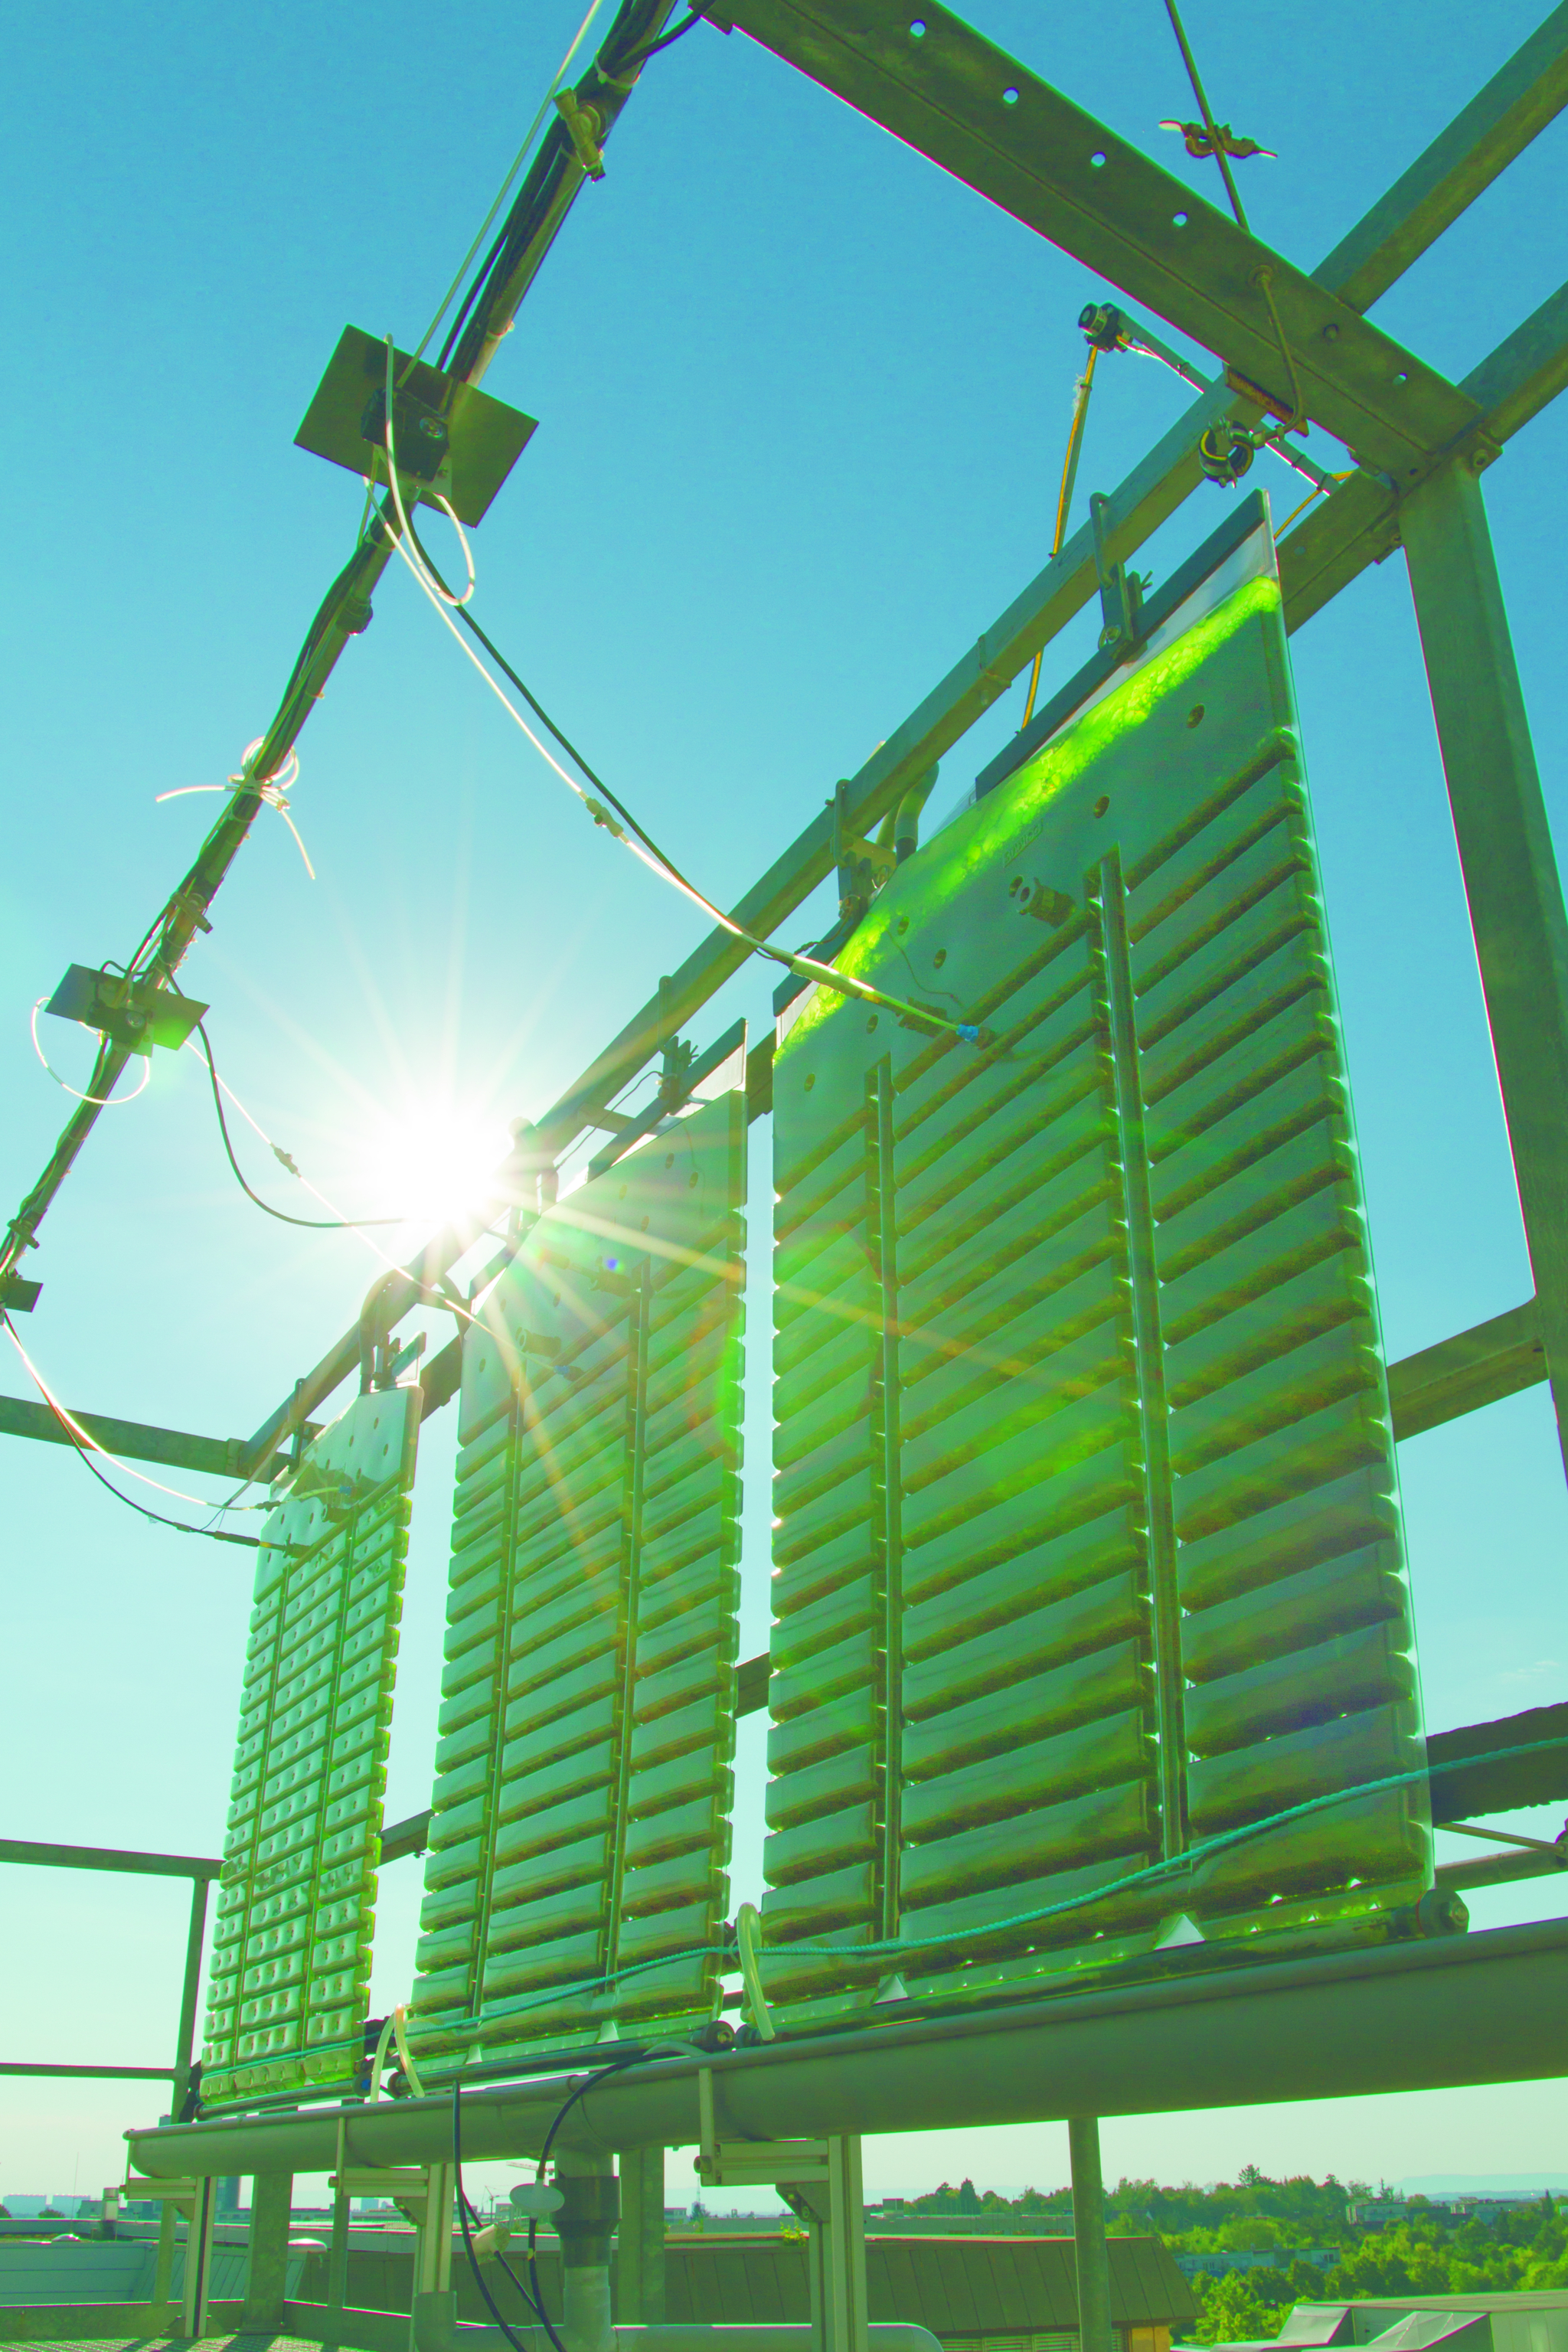 Photobioreactor pilot plant developed by the Fraunhofer IGB that enables the optimal distribution of light and mixture of the algal biomass.